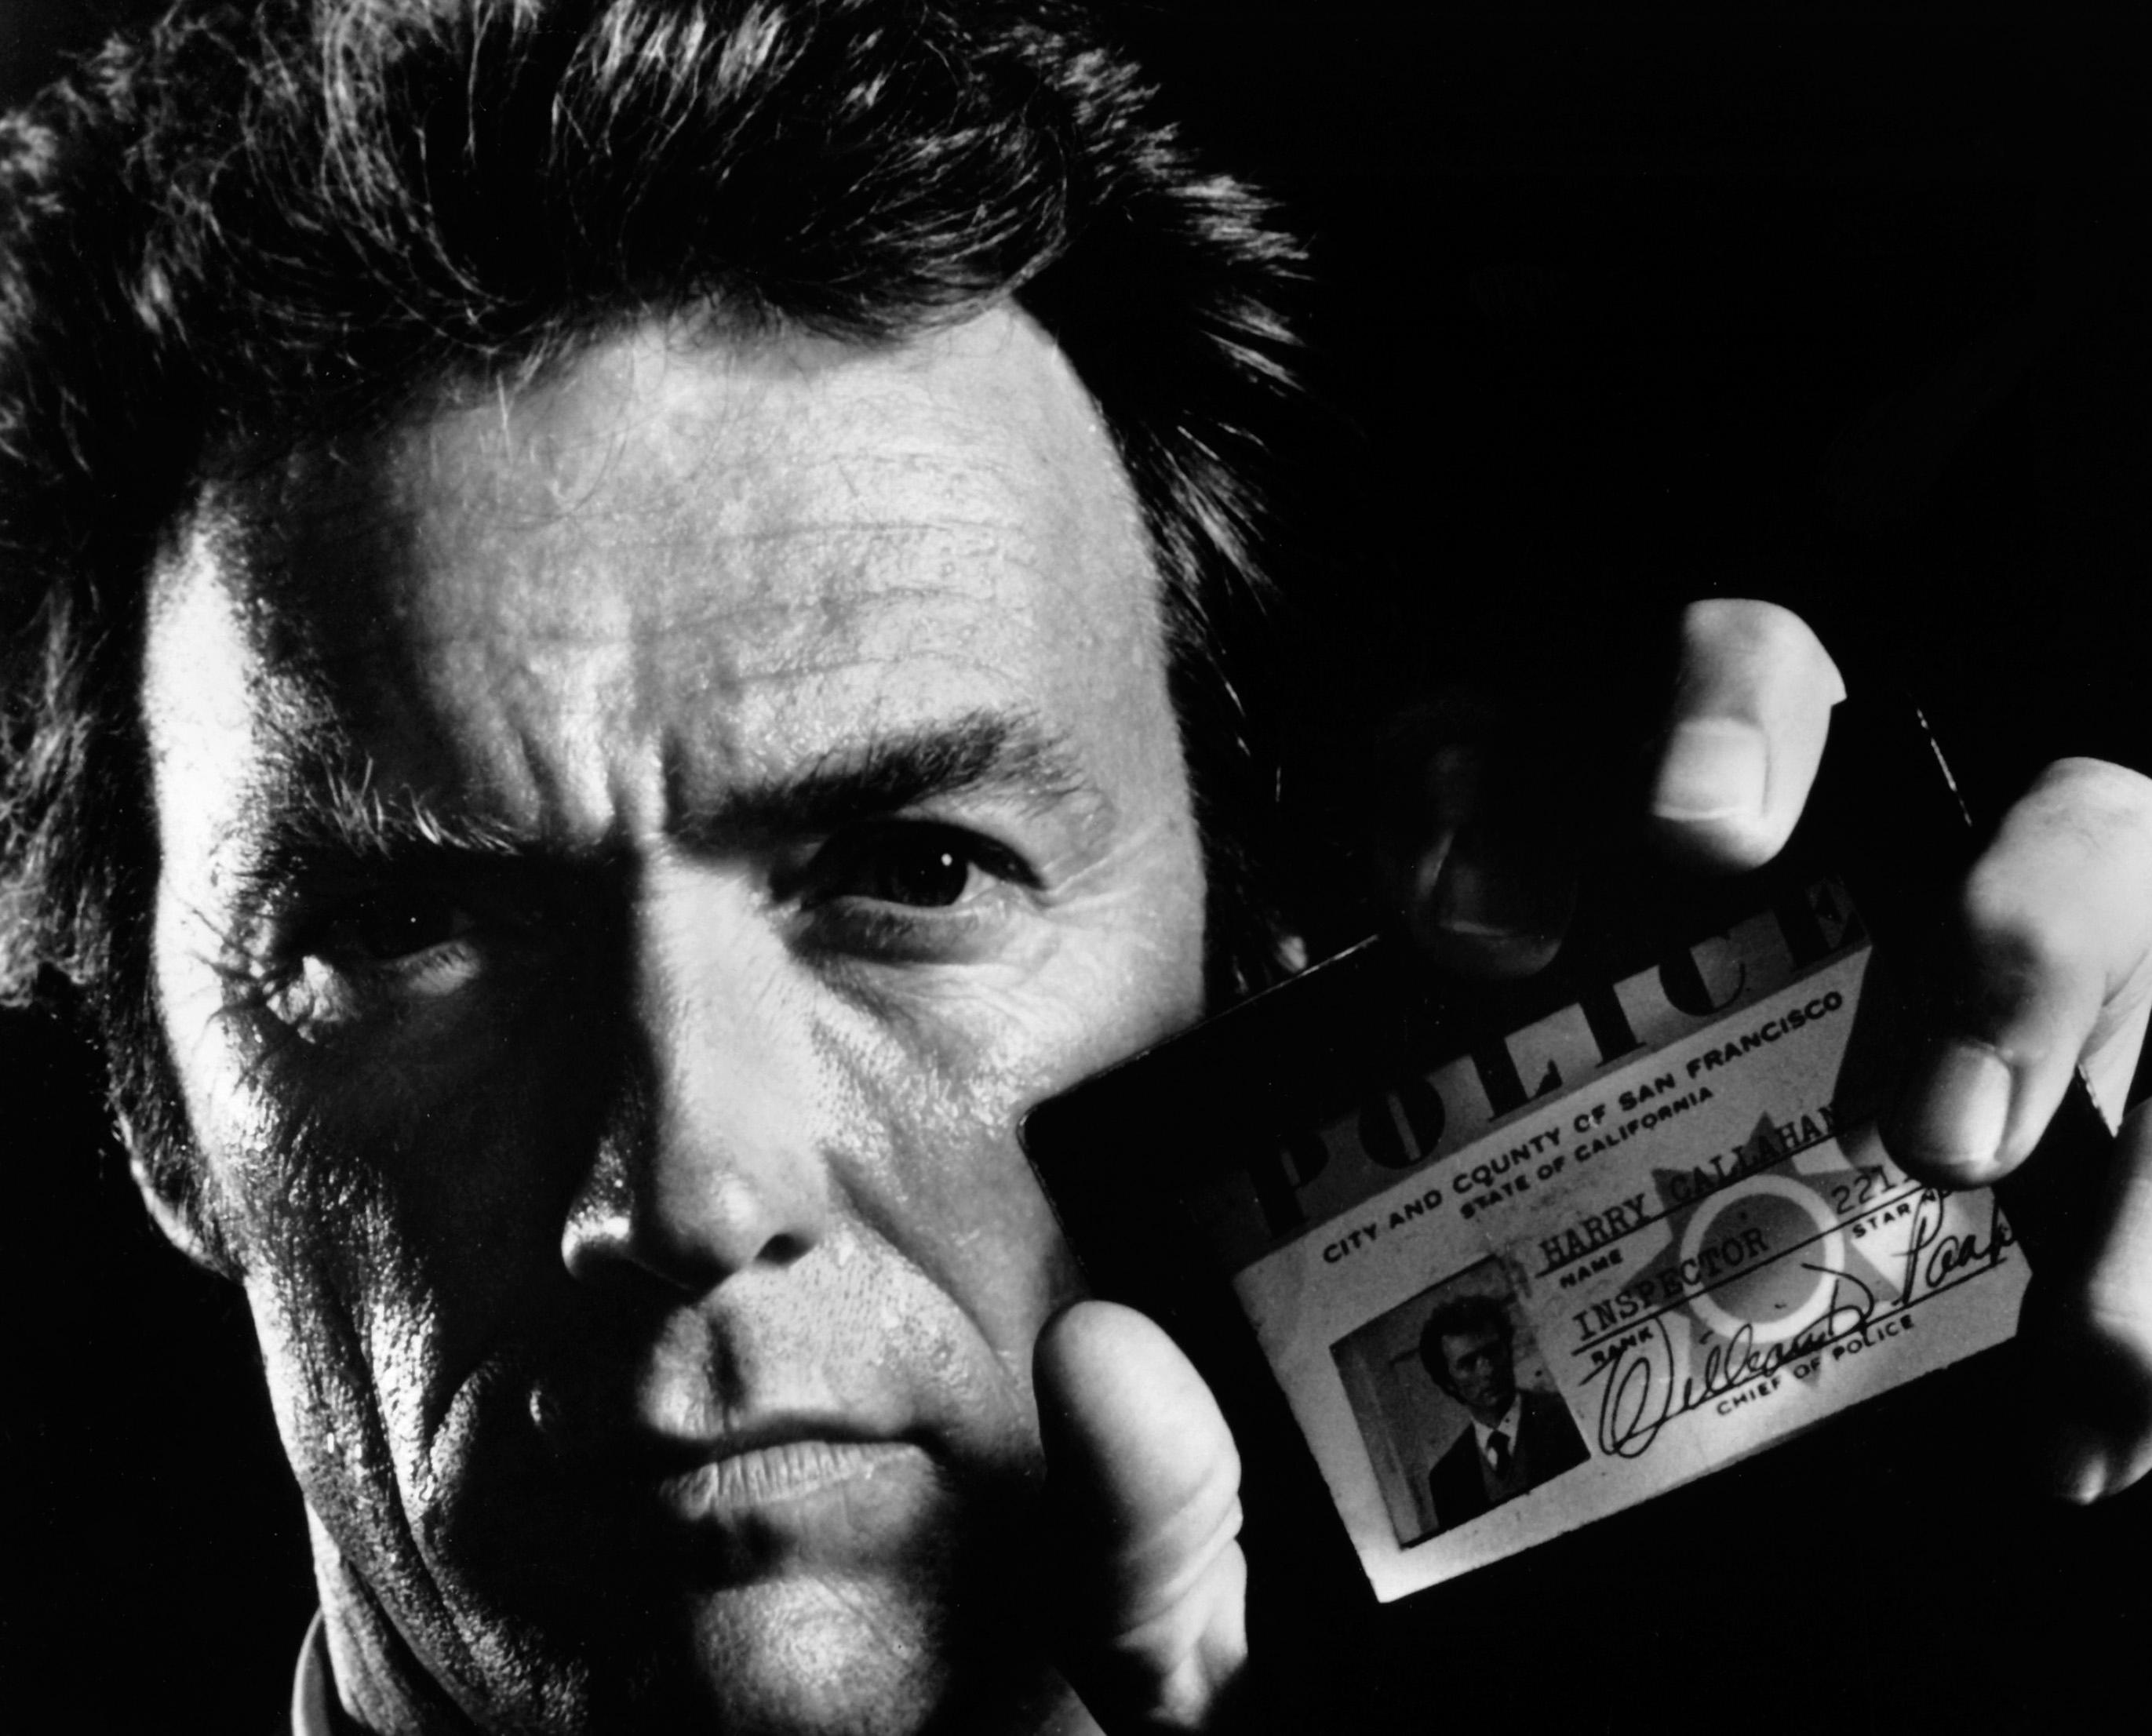 Unknown Black and White Photograph - Clint Eastwood "The Enforcer" Globe Photos Fine Art Print